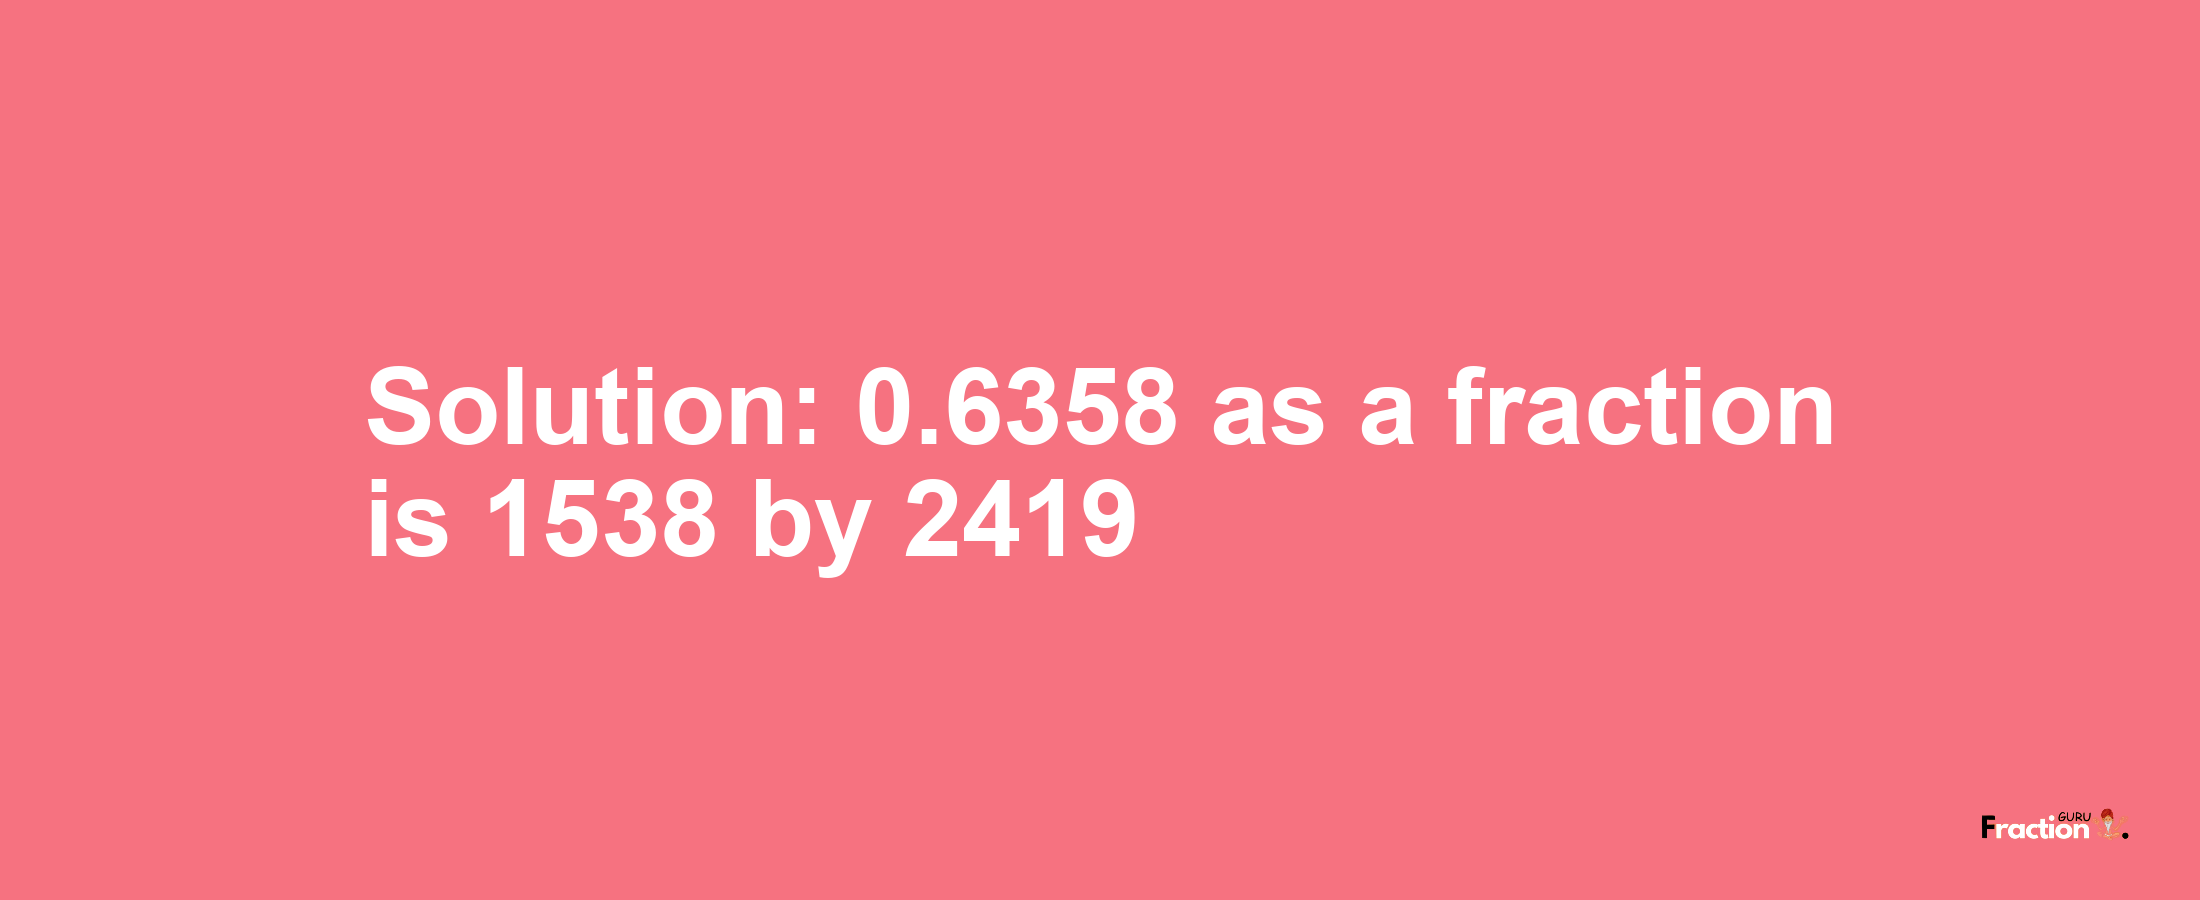 Solution:0.6358 as a fraction is 1538/2419